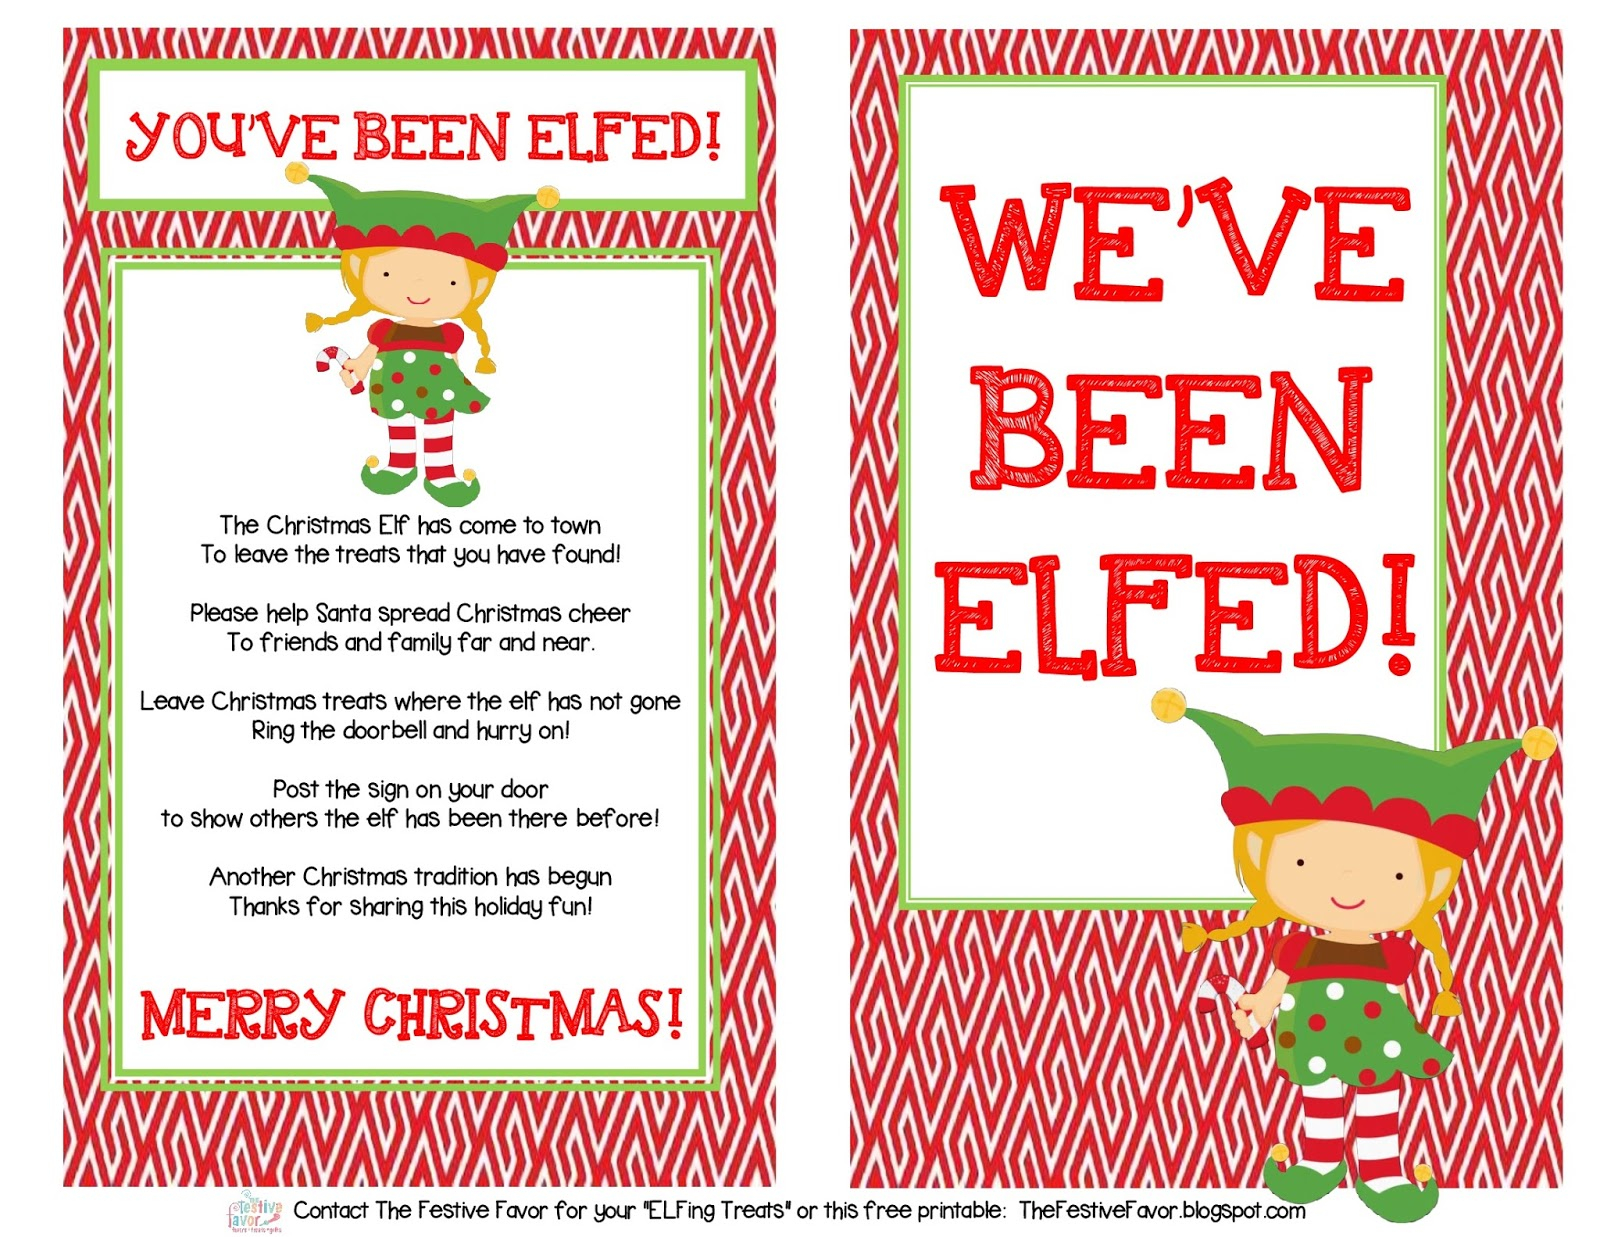 The Festive Favor You ve Been Elfed Free Printable 